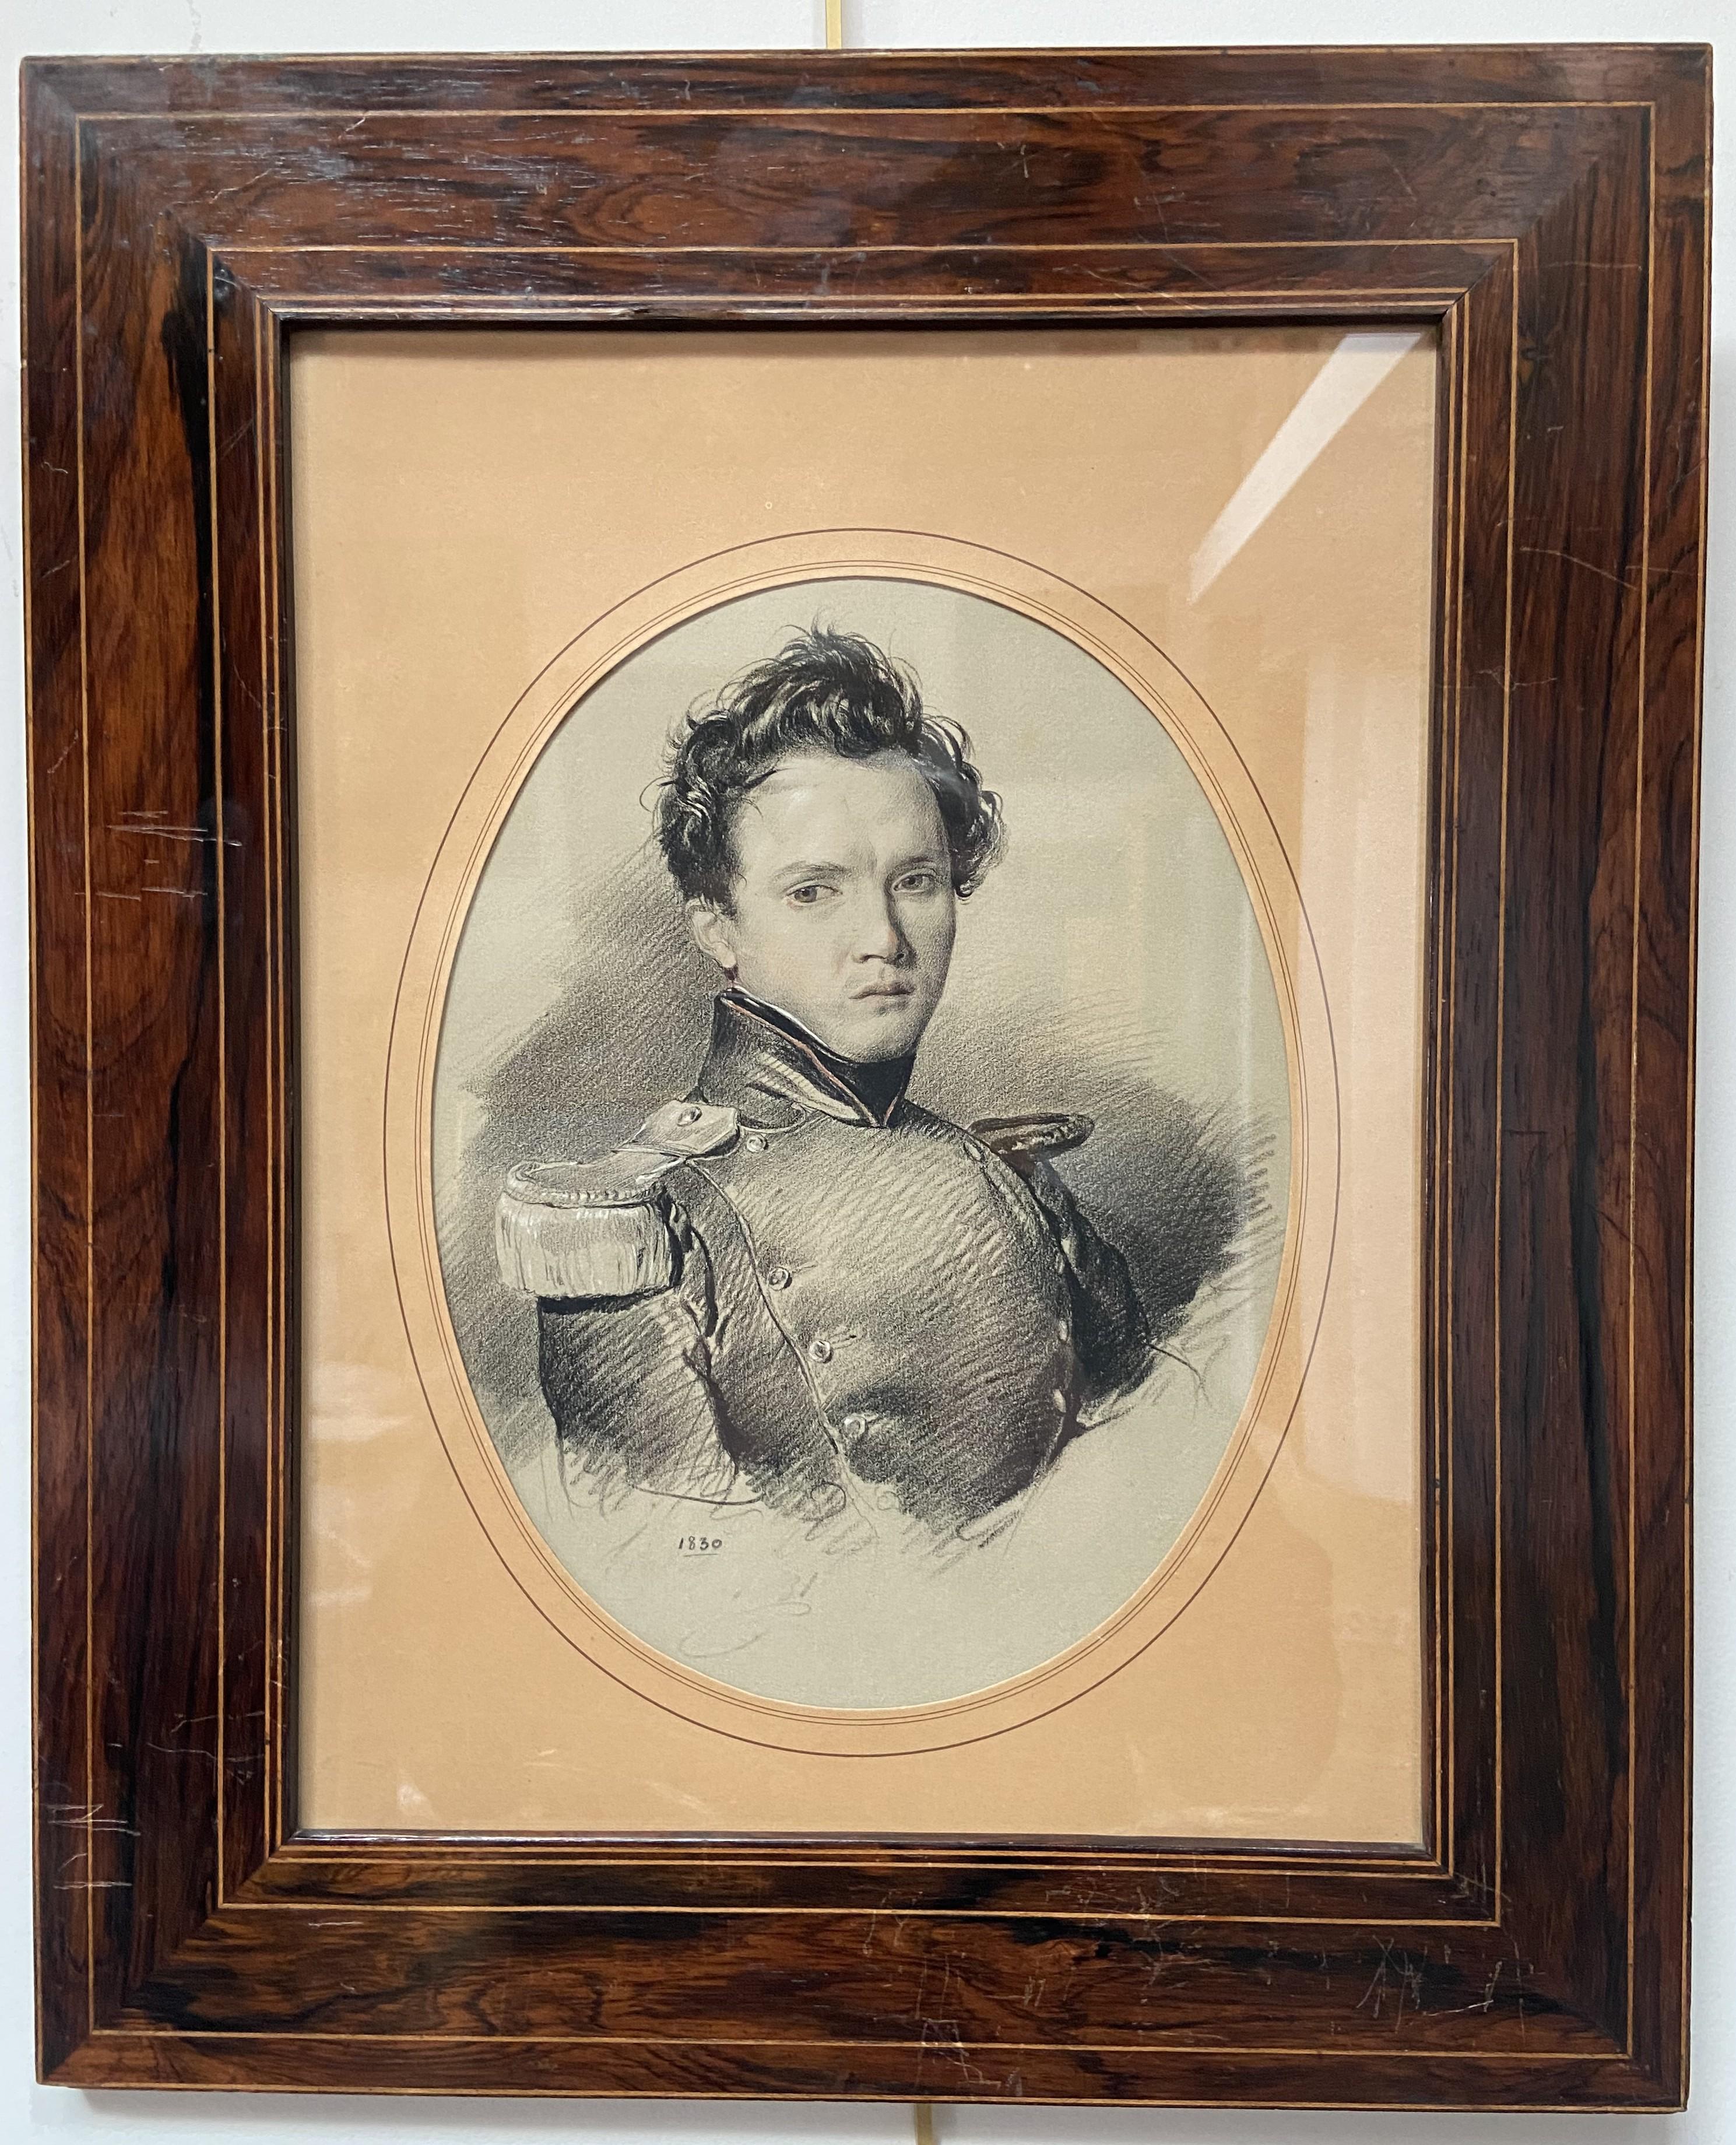 French School 19th Century, 
Portrait of a young soldier, dated 1830, 
Pencil and heightenings of white and red
26 x 19.7 cm oval view
examined outside the frame, in good condition
In its original framing 46.5 x 38 cm,  numerous scratches on